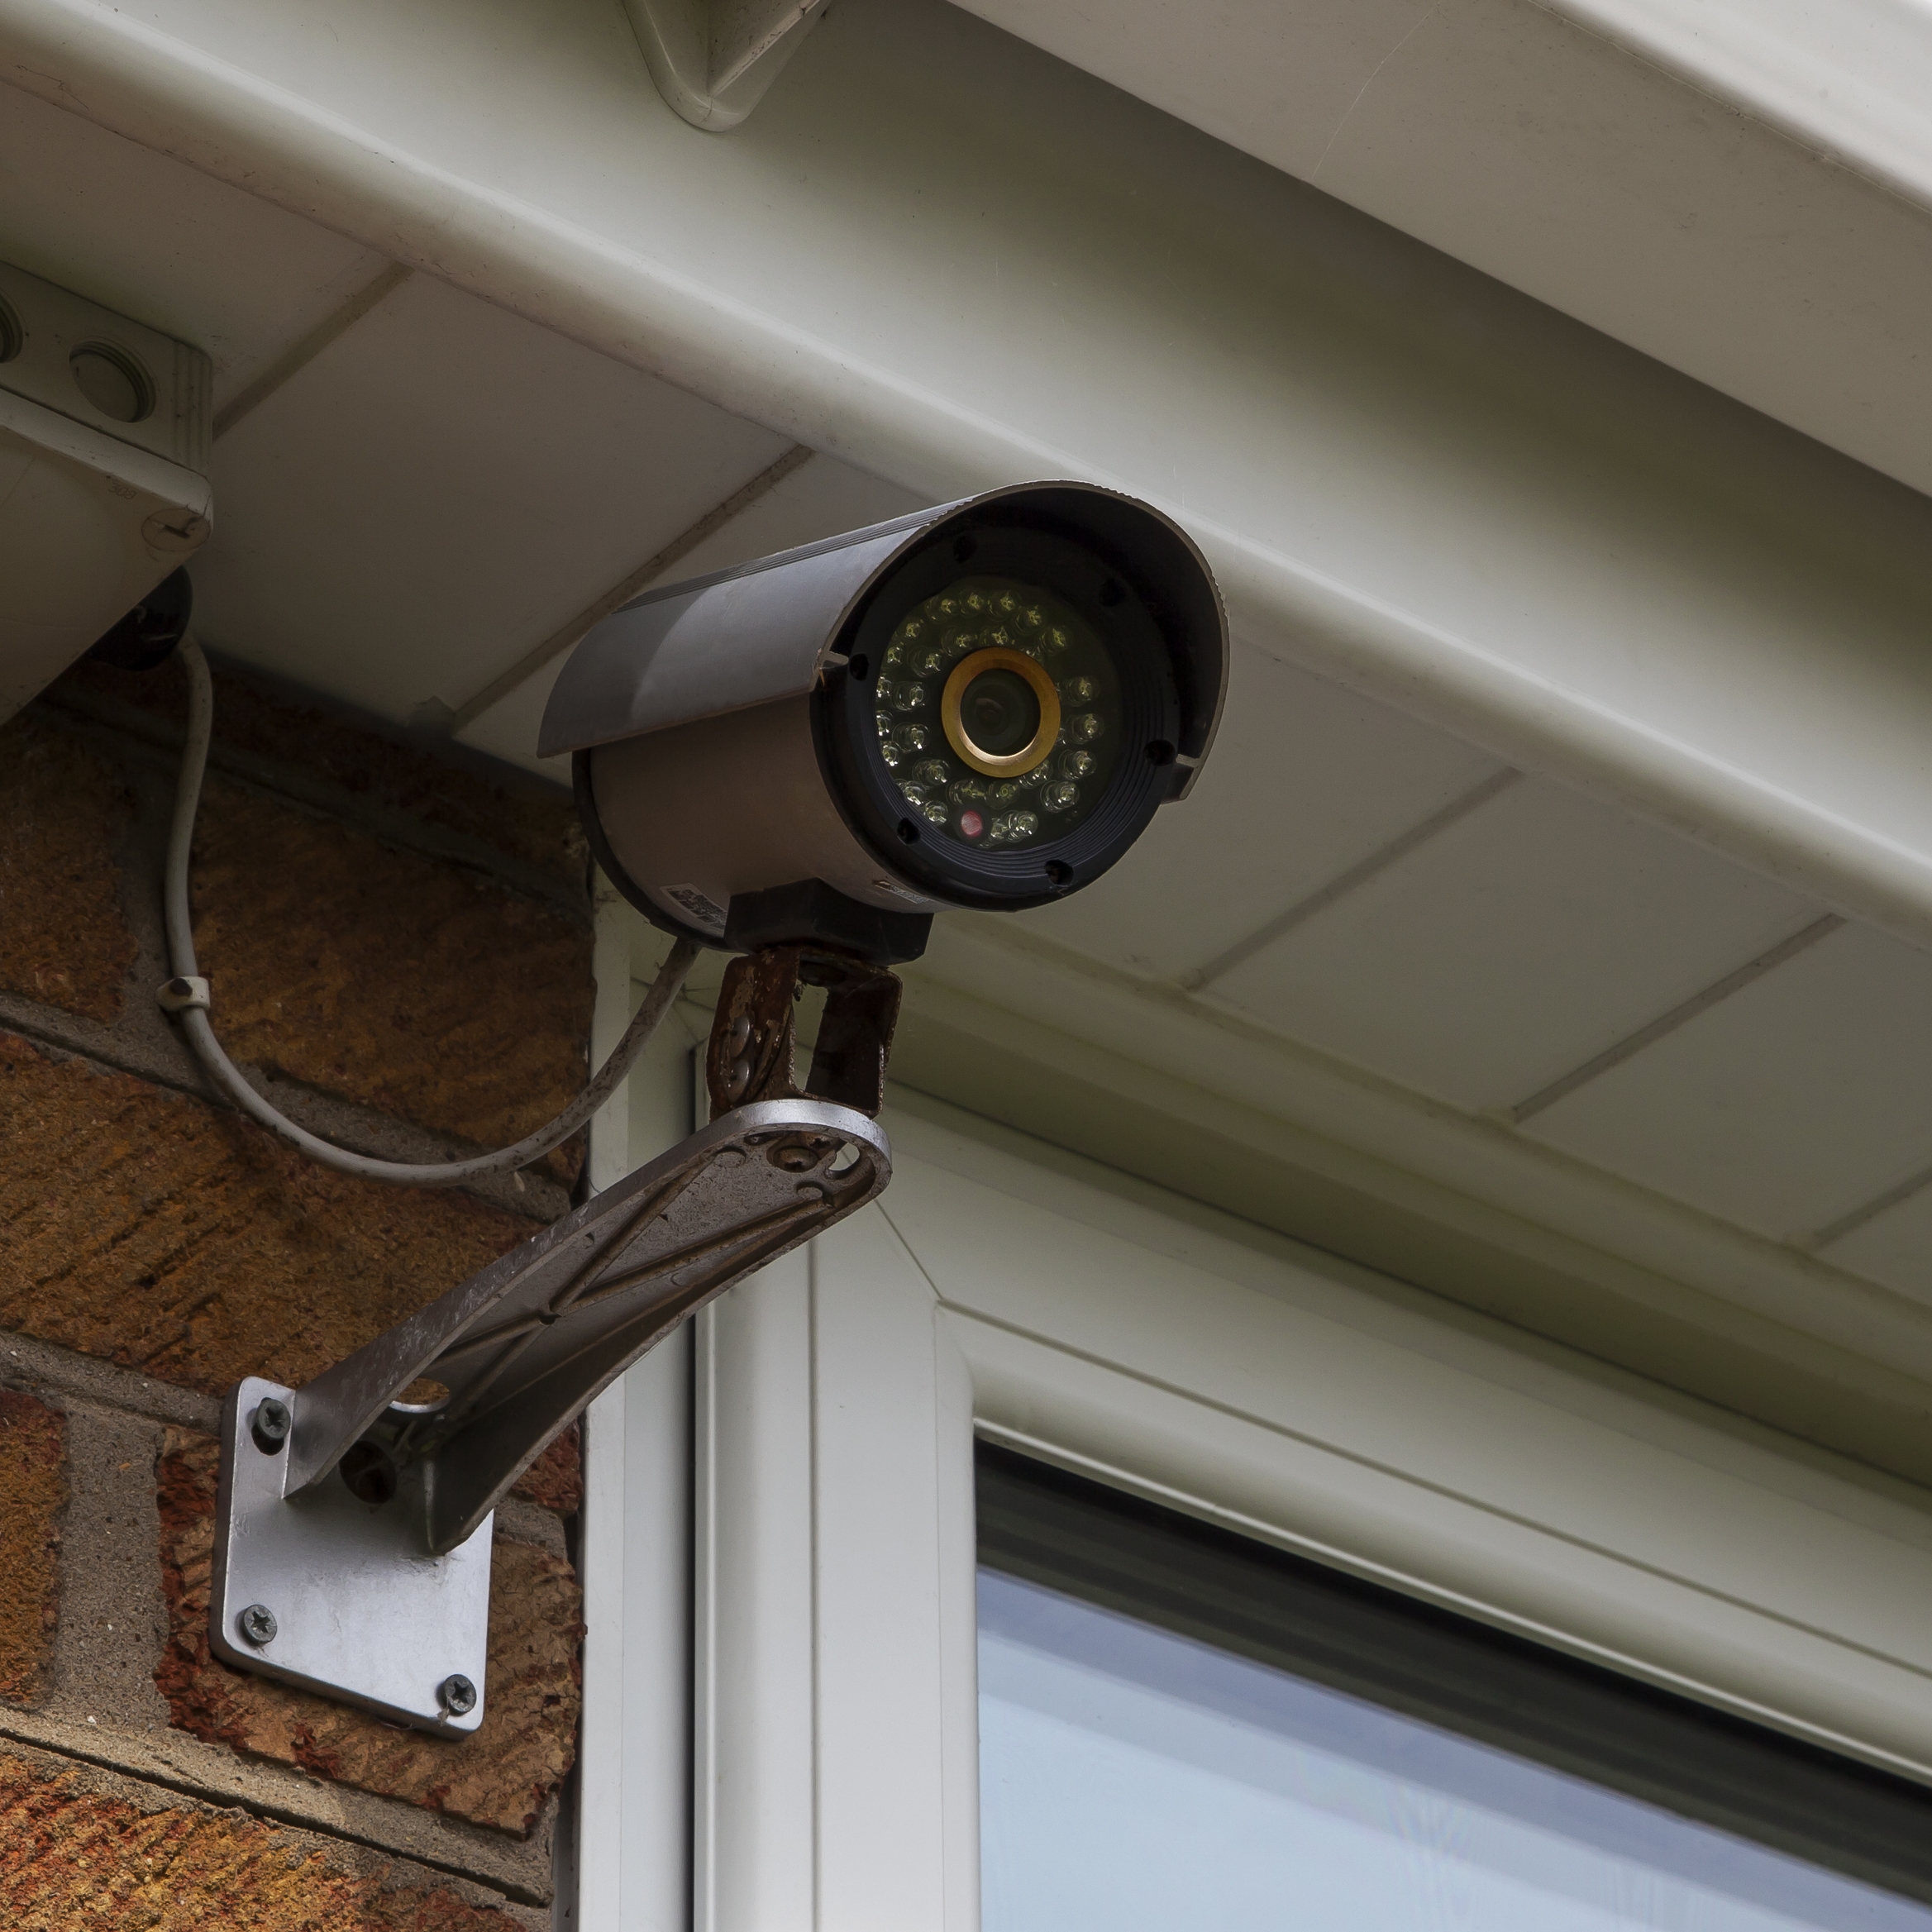 Having security cameras on the property gives our tenants a safe and comfor...